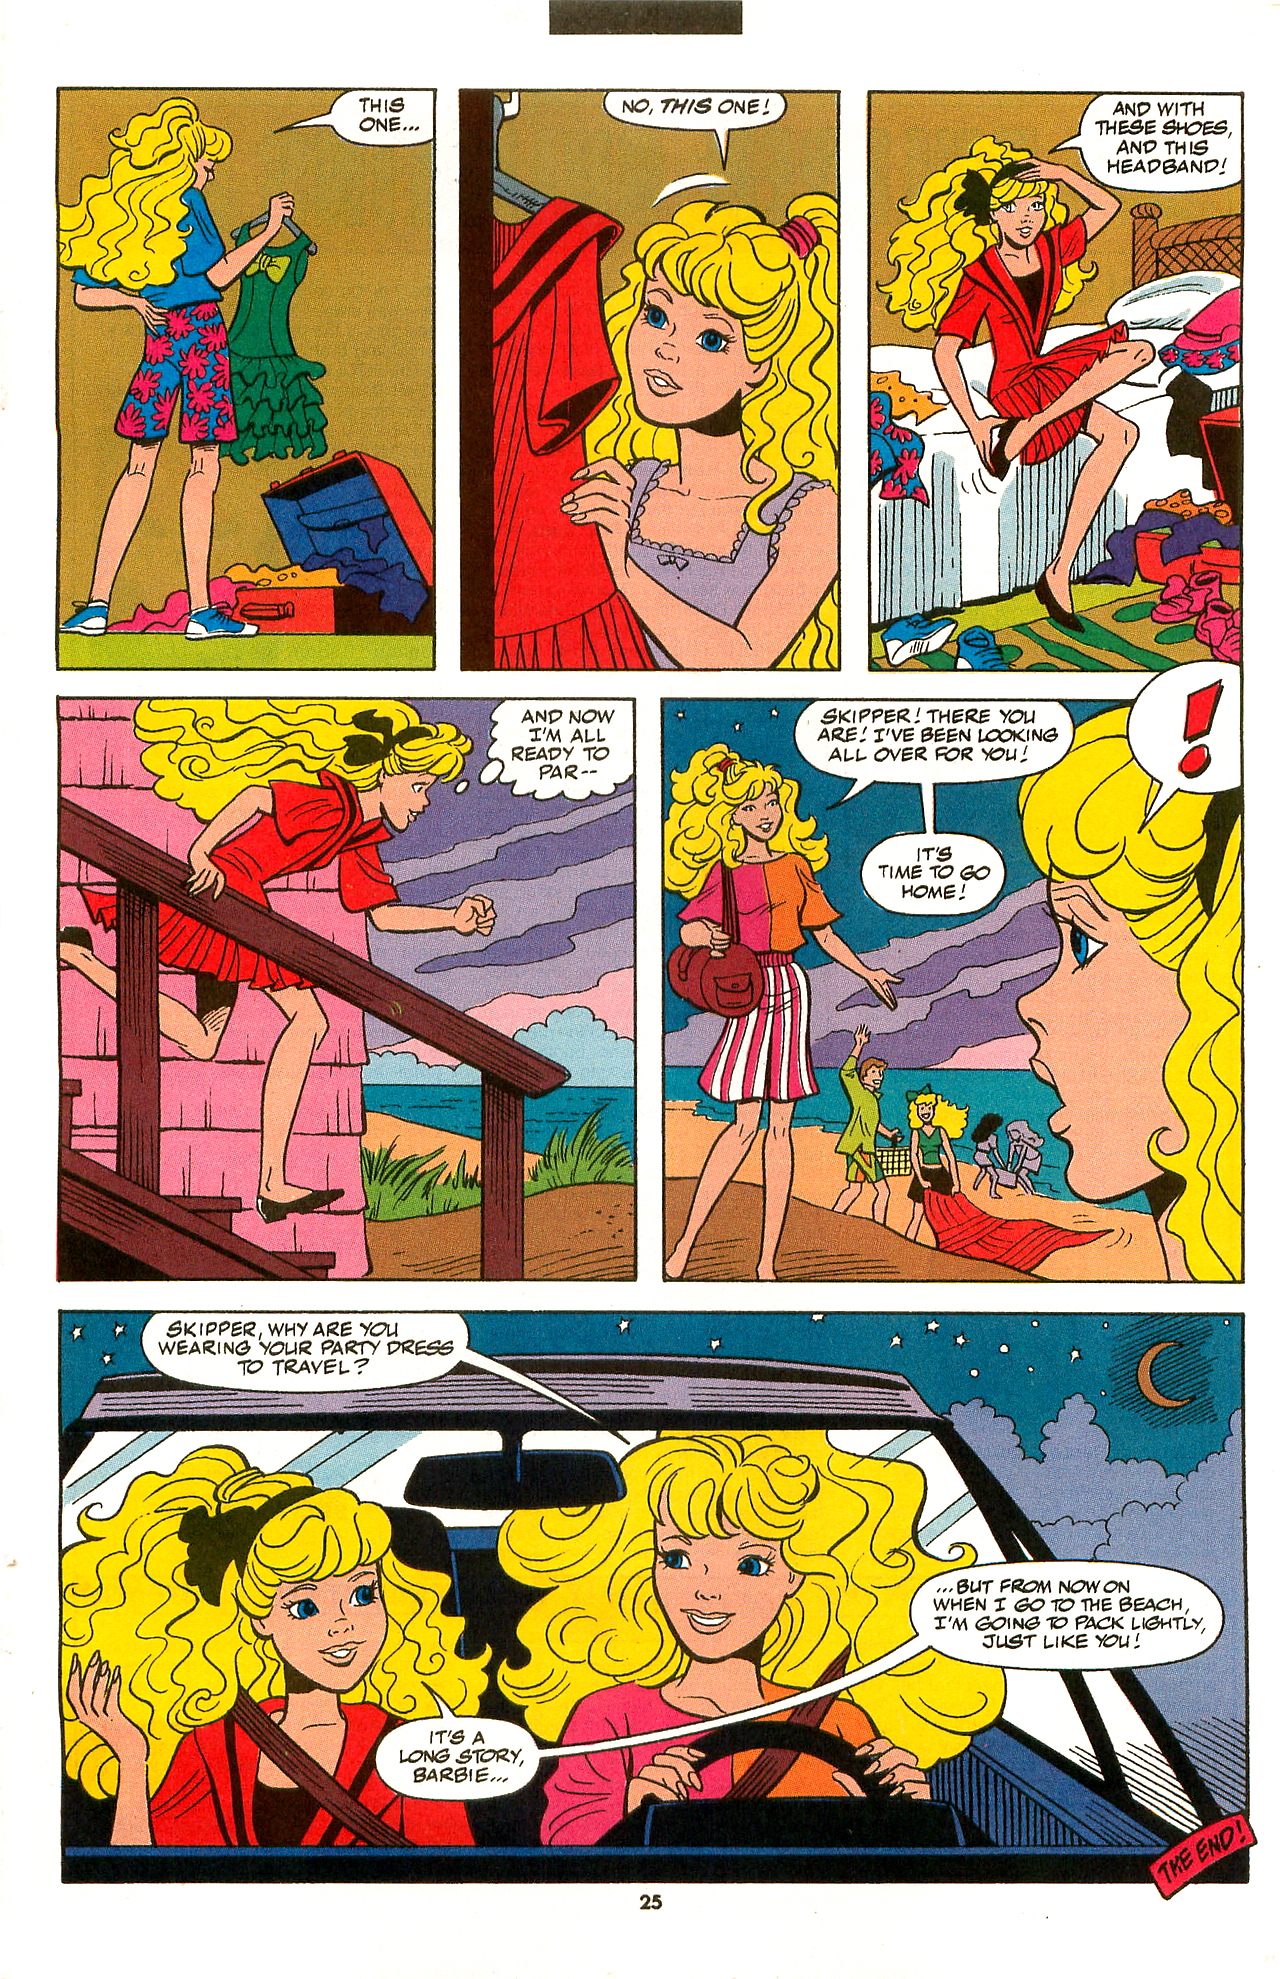 Read online Barbie comic -  Issue #5 - 27